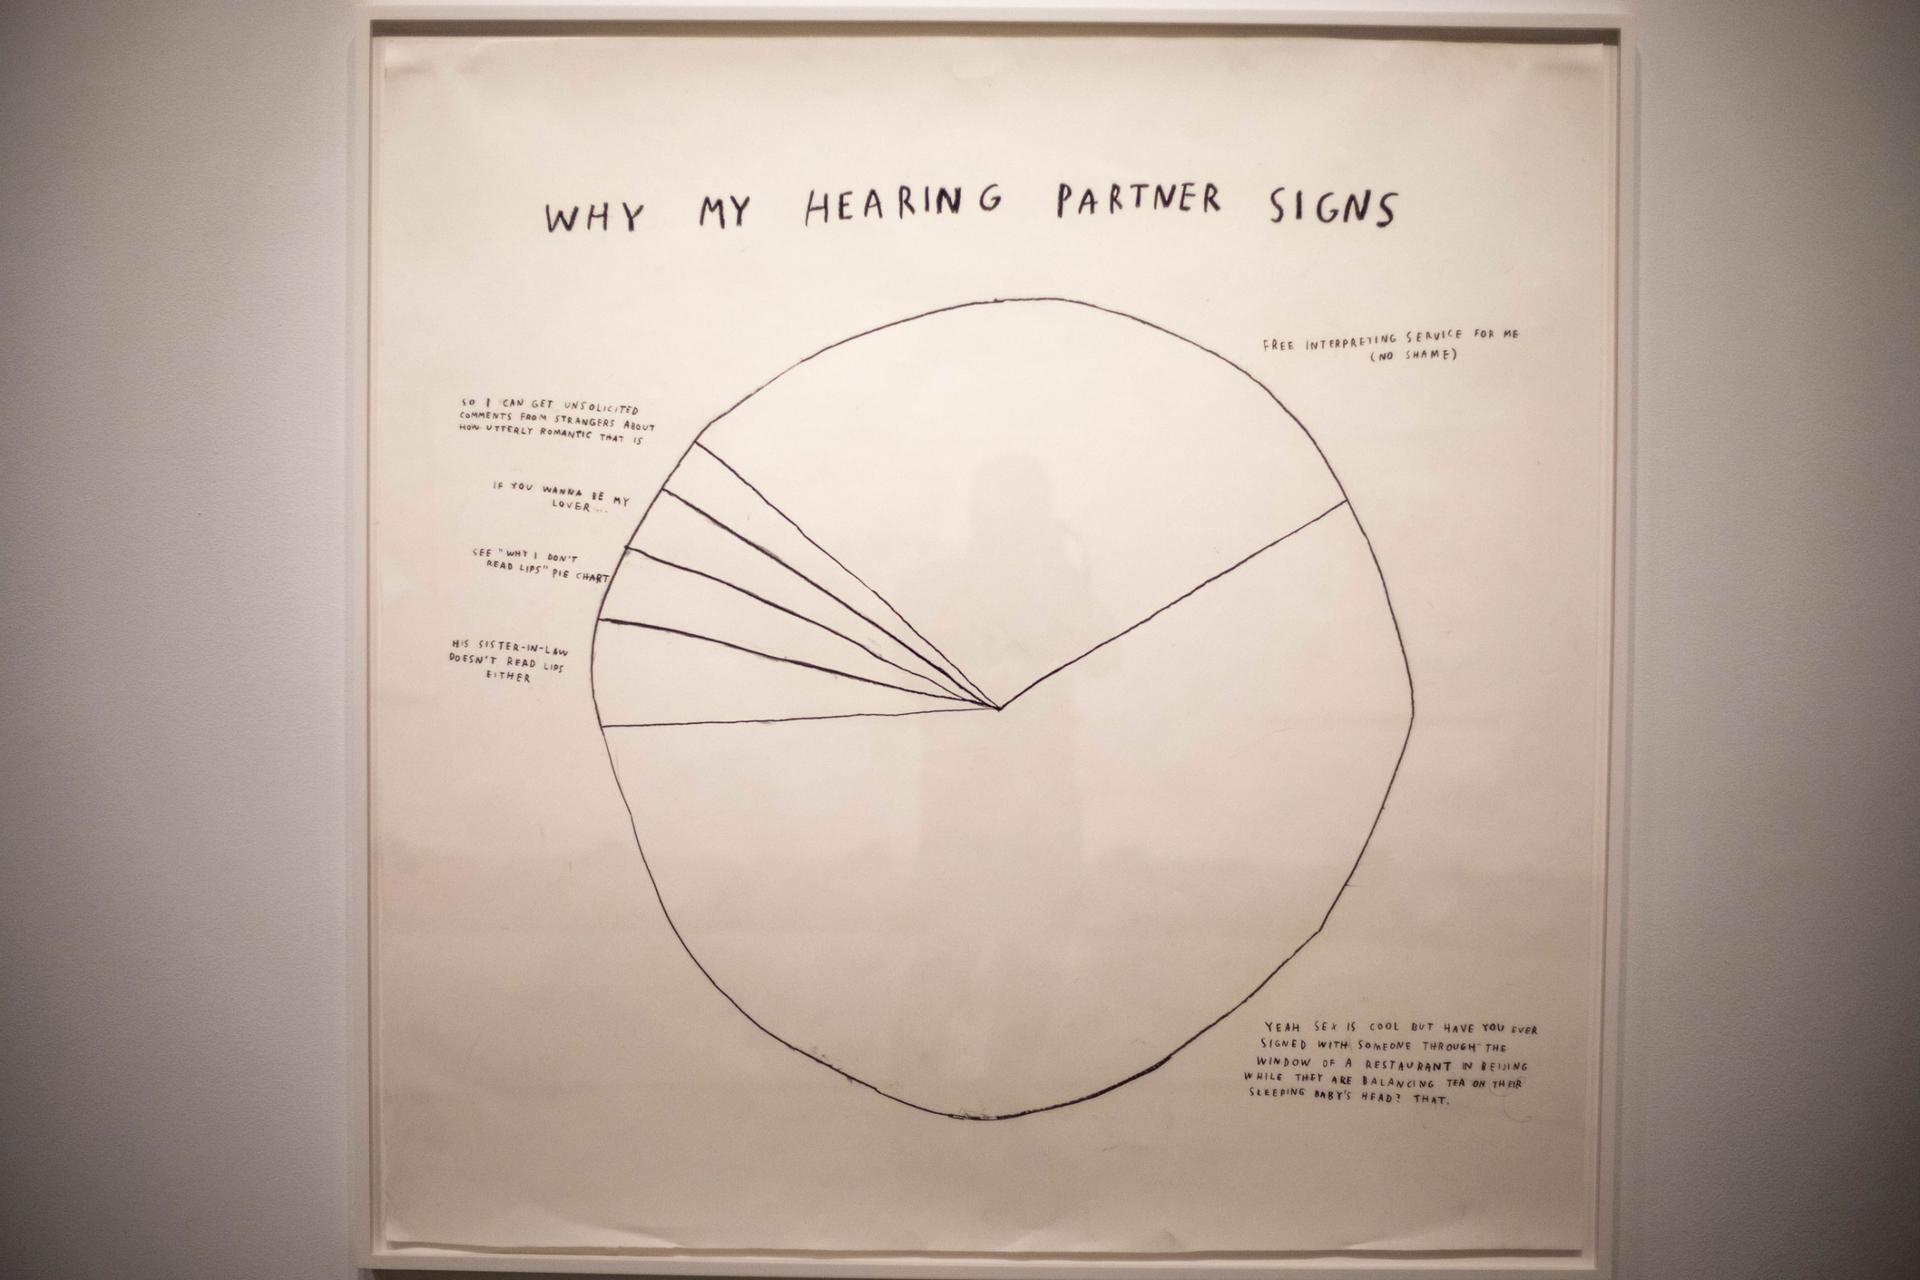 Christine Sun Kim's artwork shows a charcoal diagram with the title, "Why My Hearing Partner Signs," at the top.